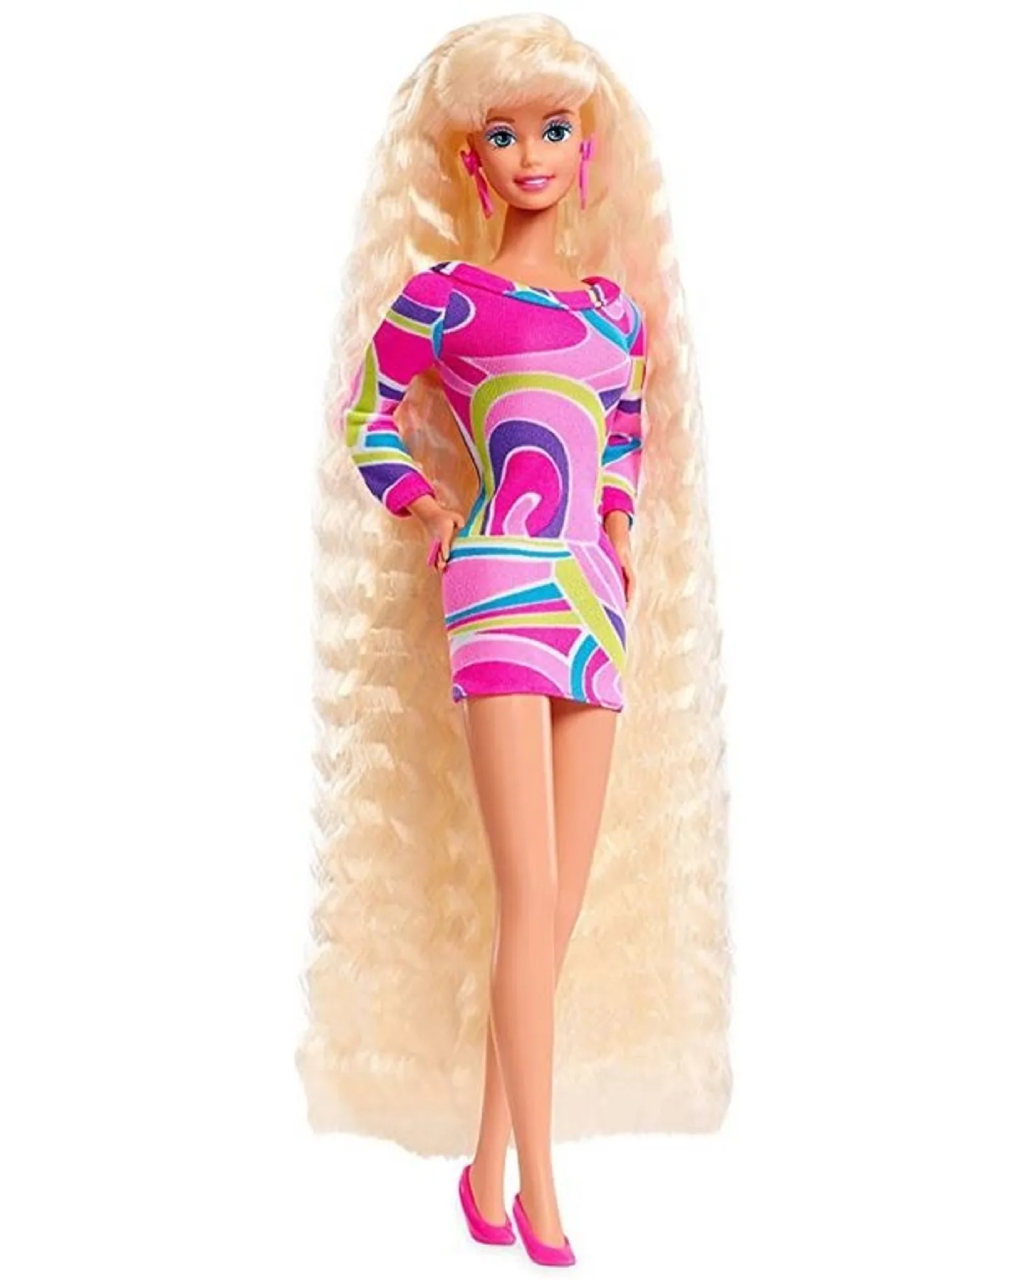 Barbie Totally Hair 1991 remake